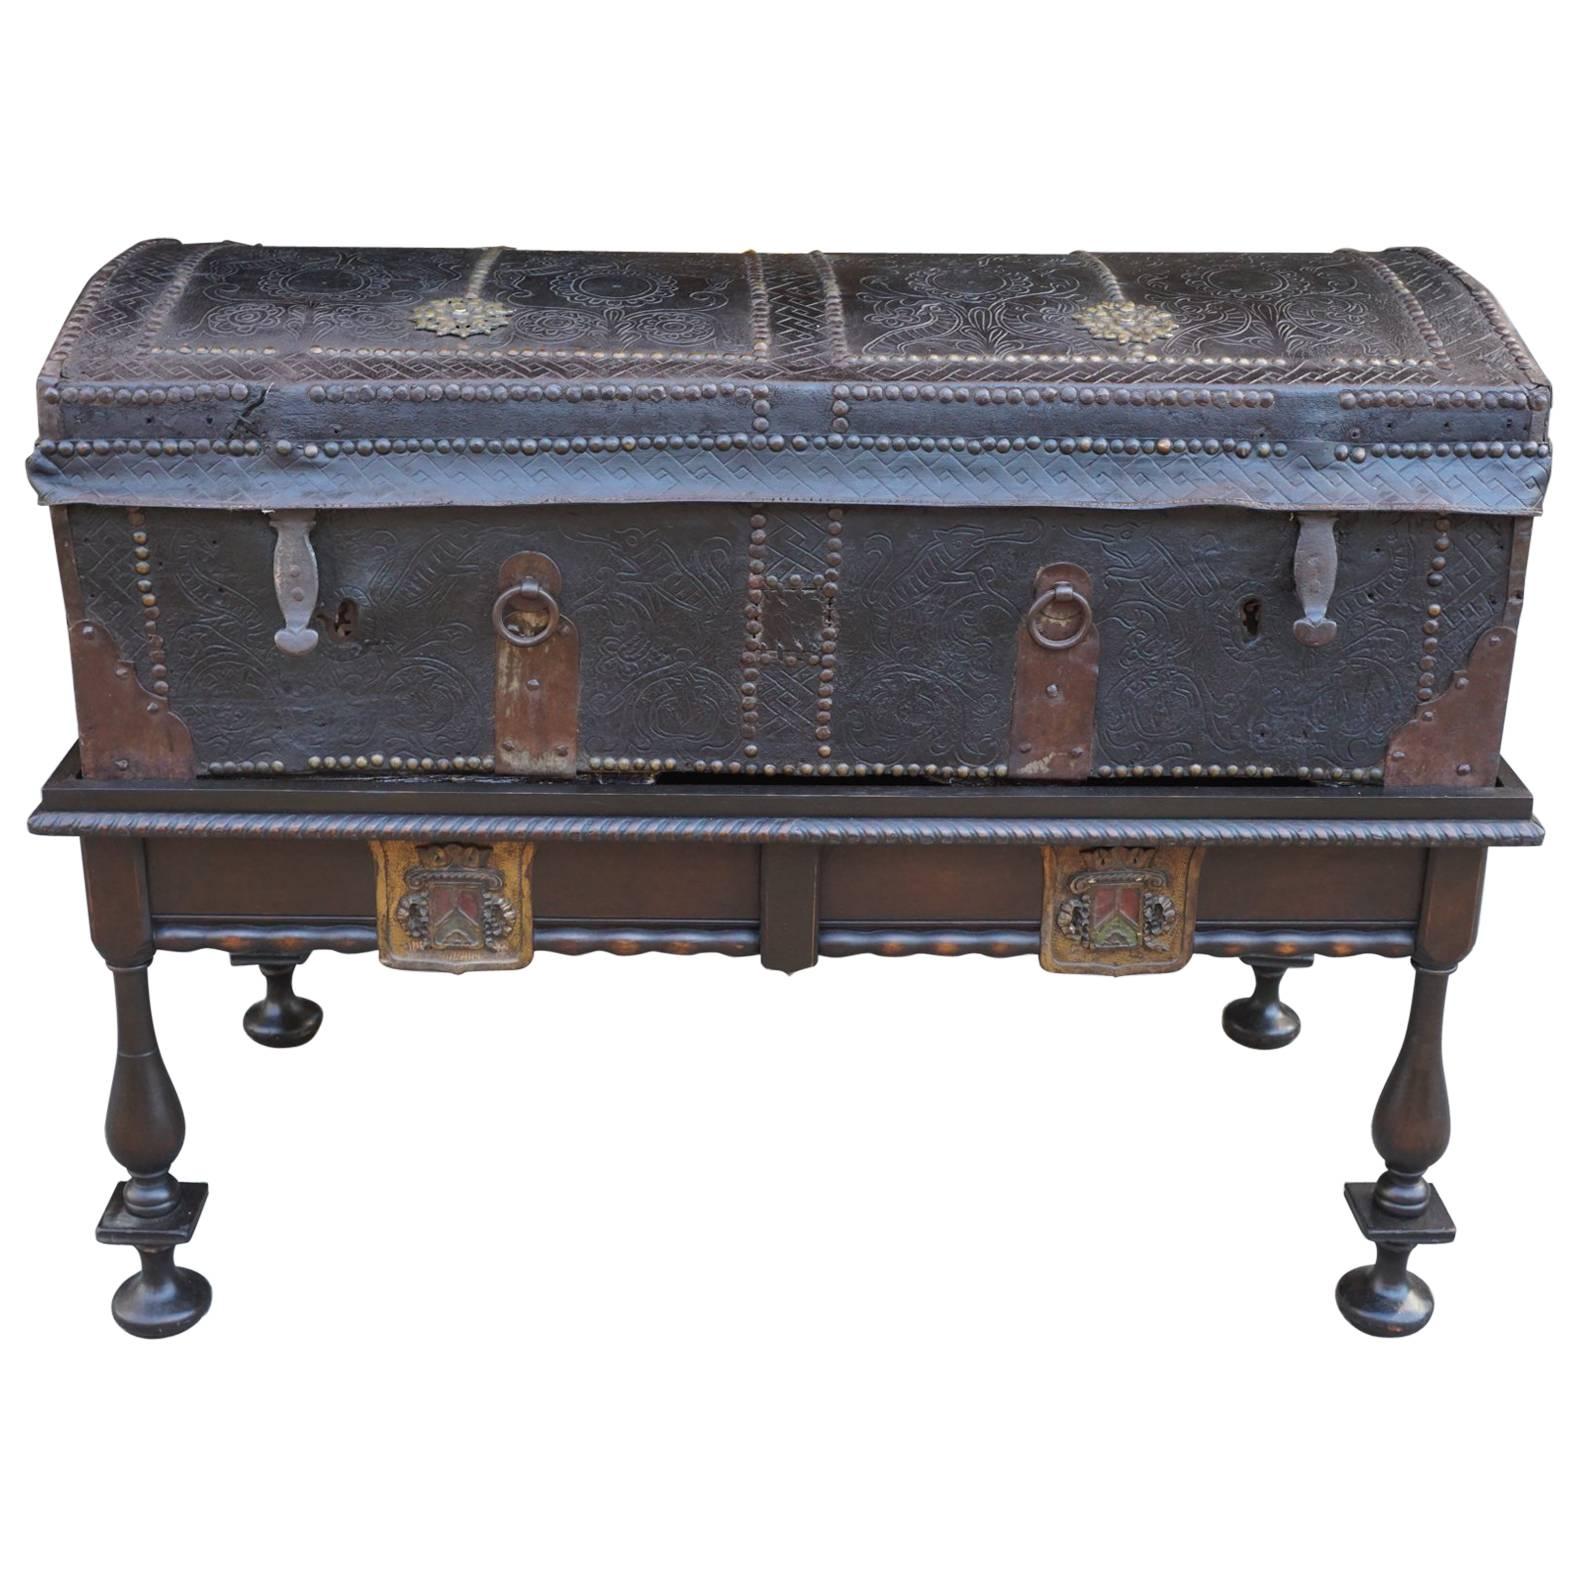 17th Century English Leather Travel Trunk on Later Stand